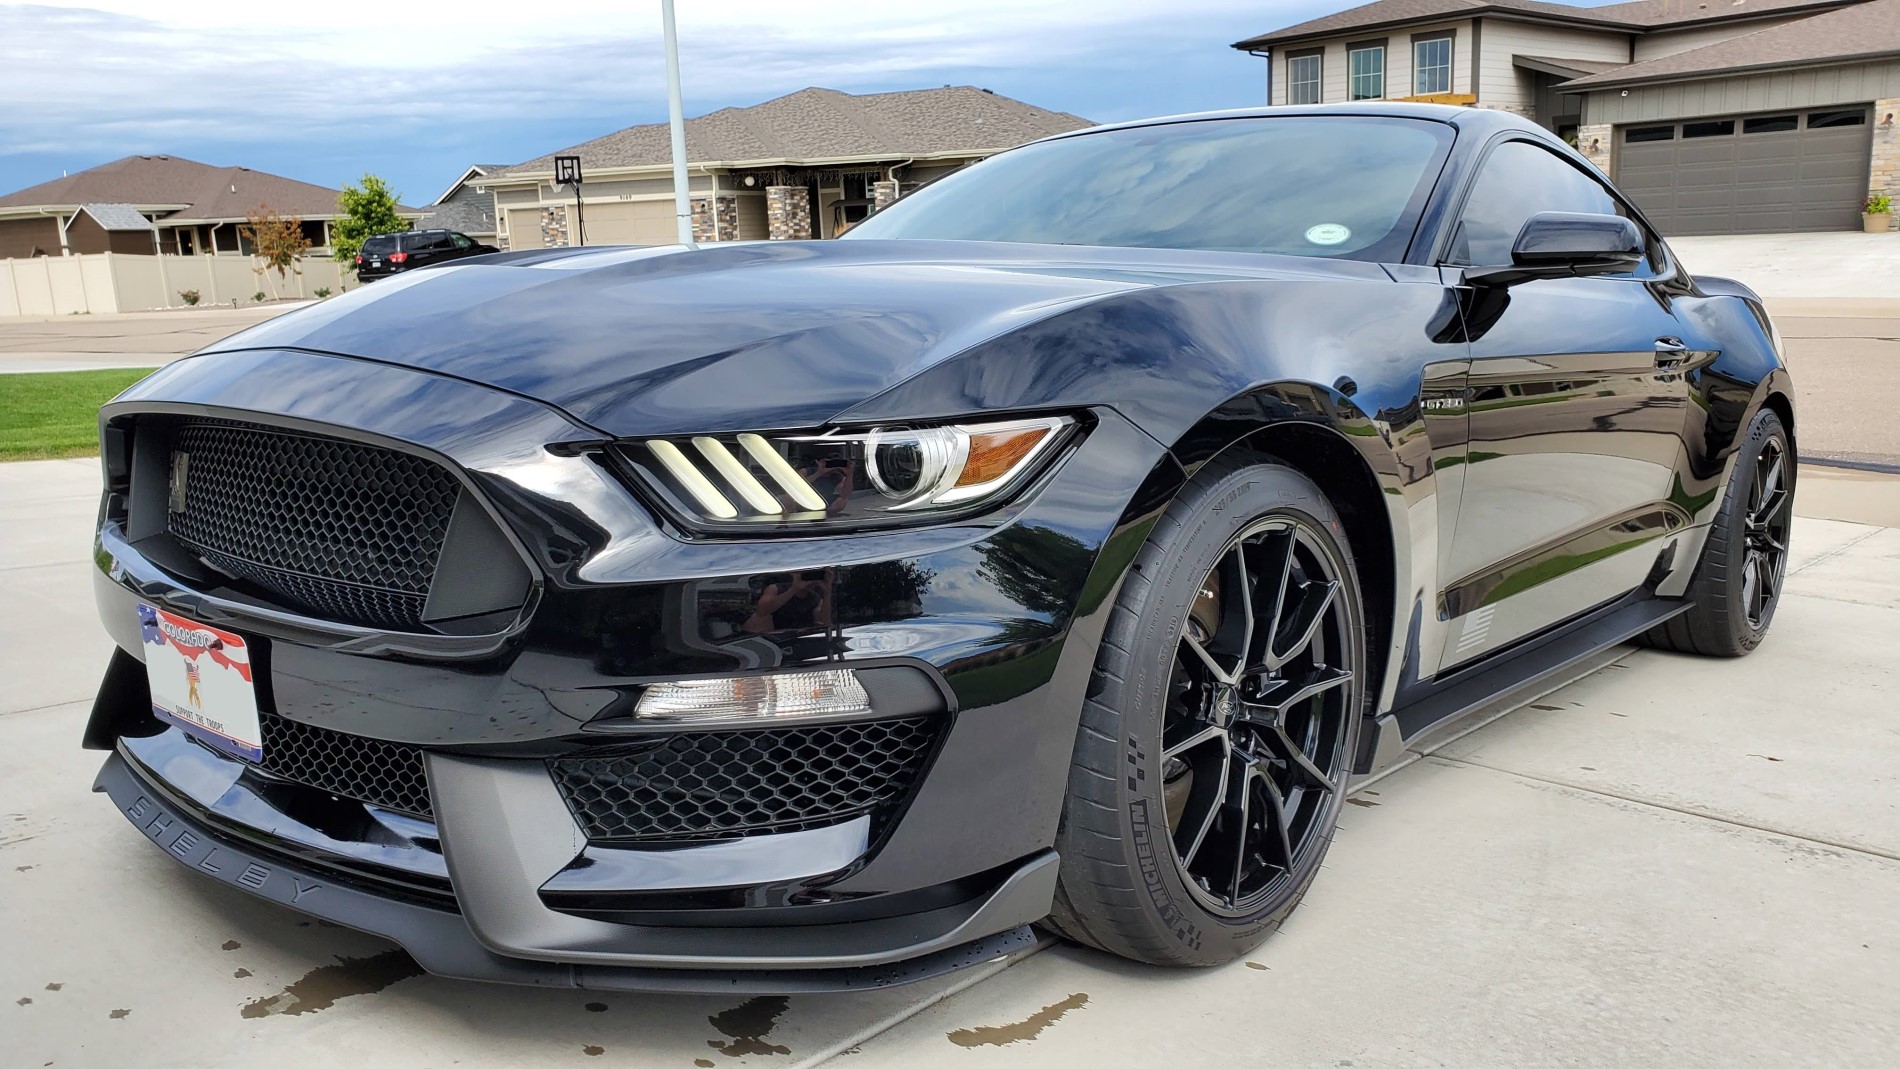 S650 Mustang image test 2019_Shelby_GT350_fixed_web